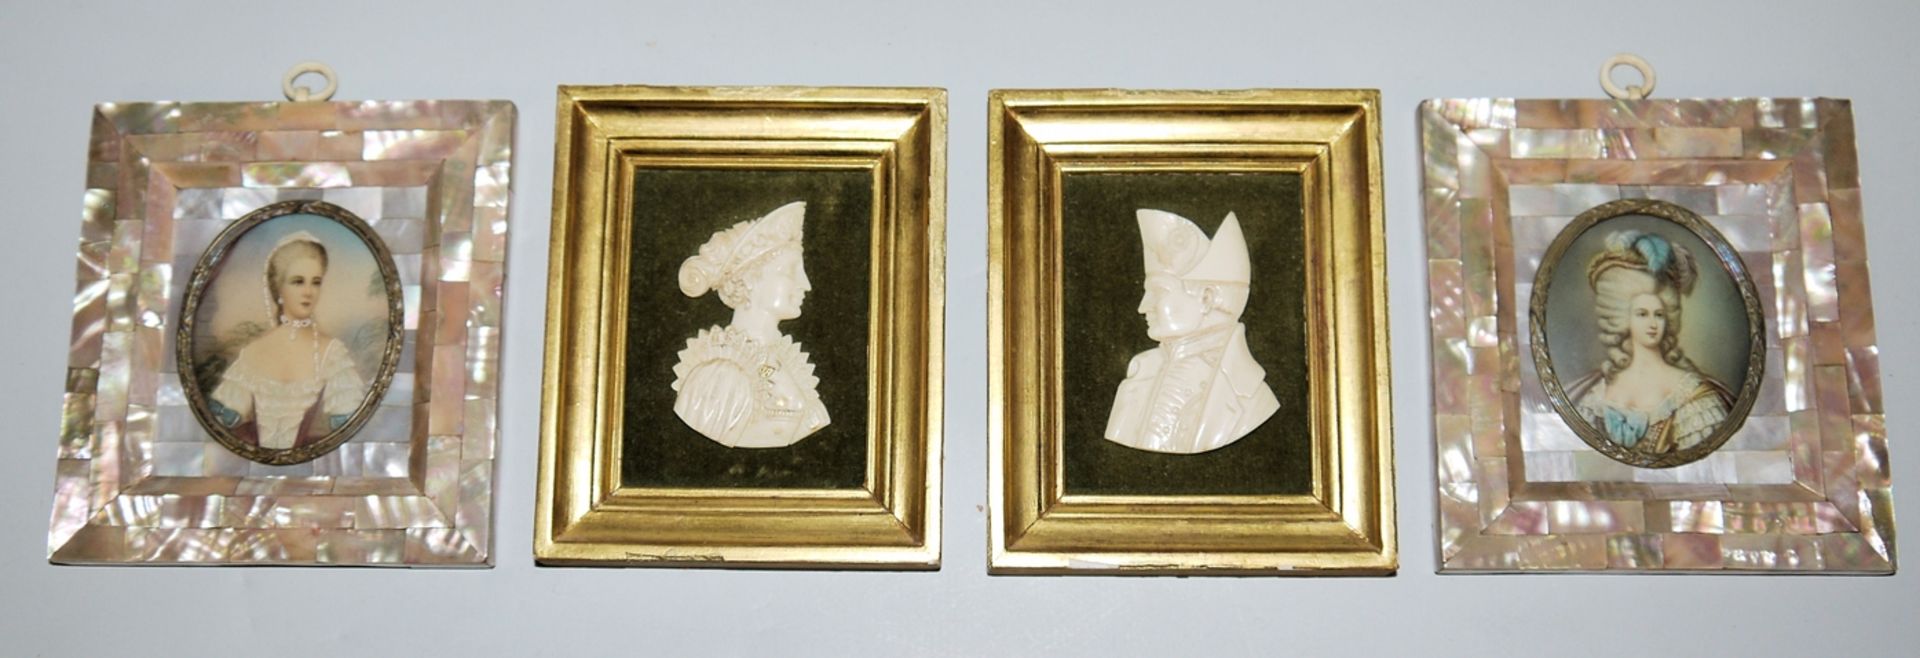 Collection estate with 12 miniatures from ca. 1800 - Image 3 of 4